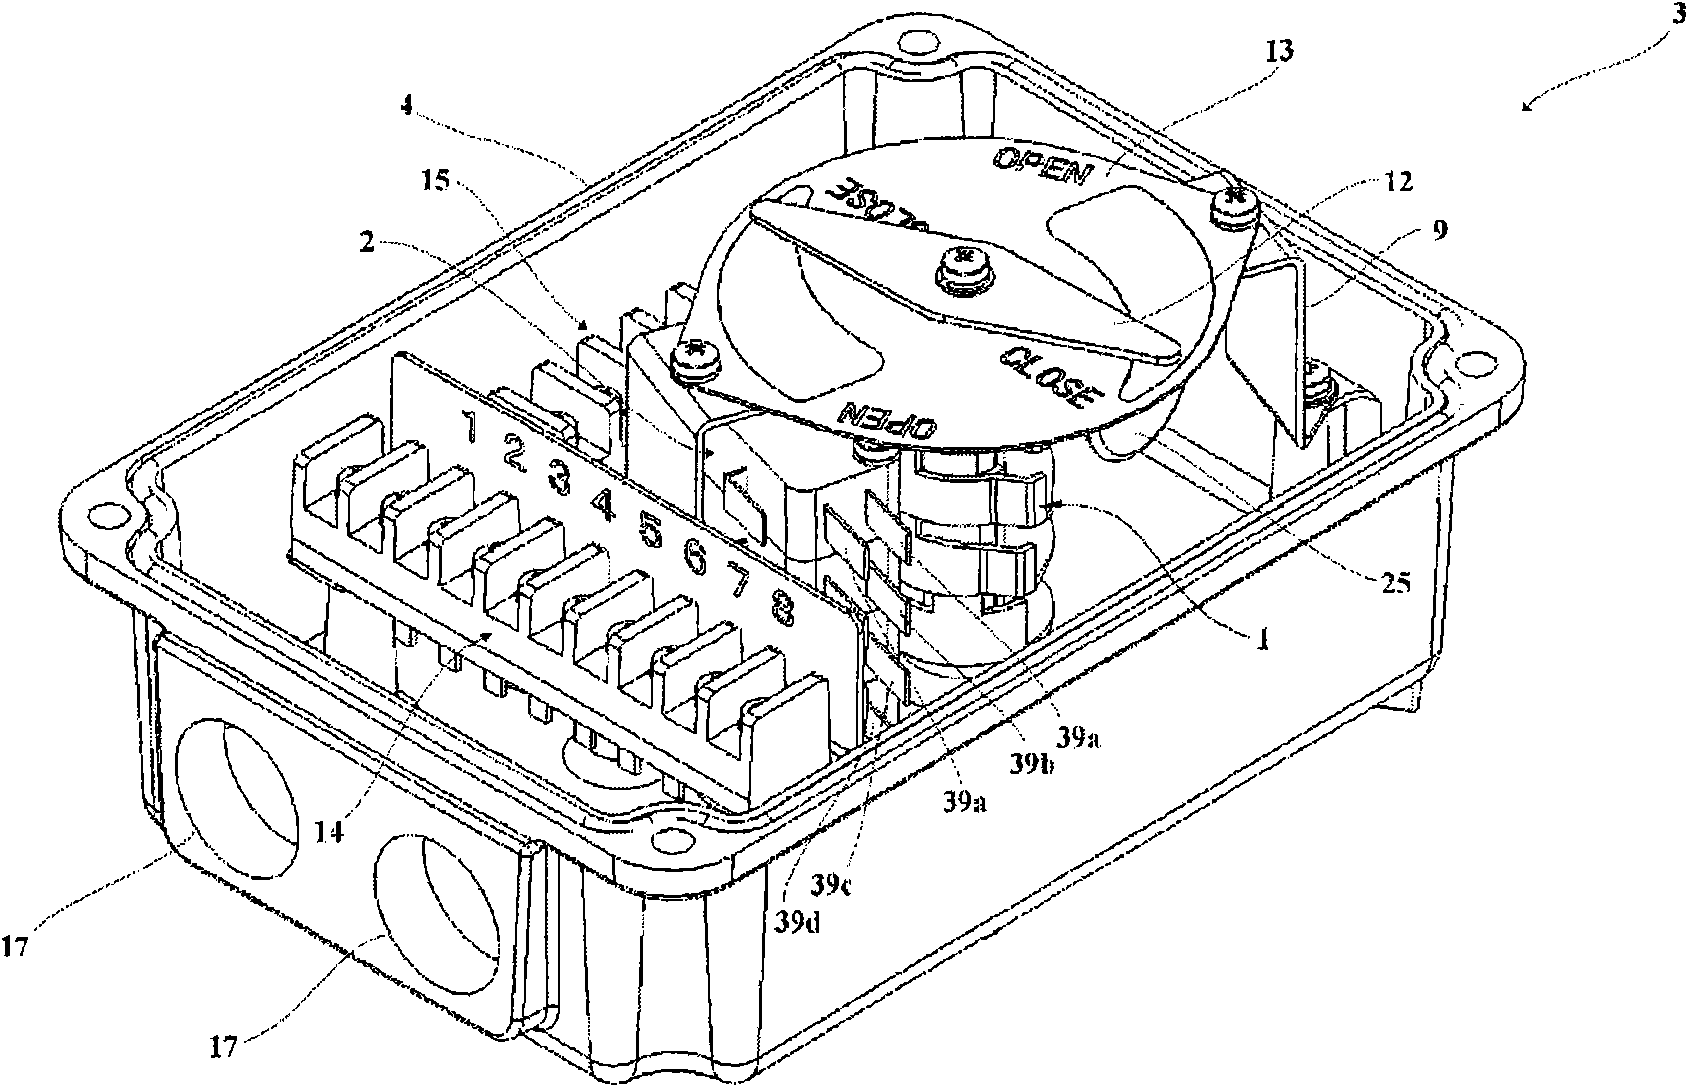 Valve opening degree detection device